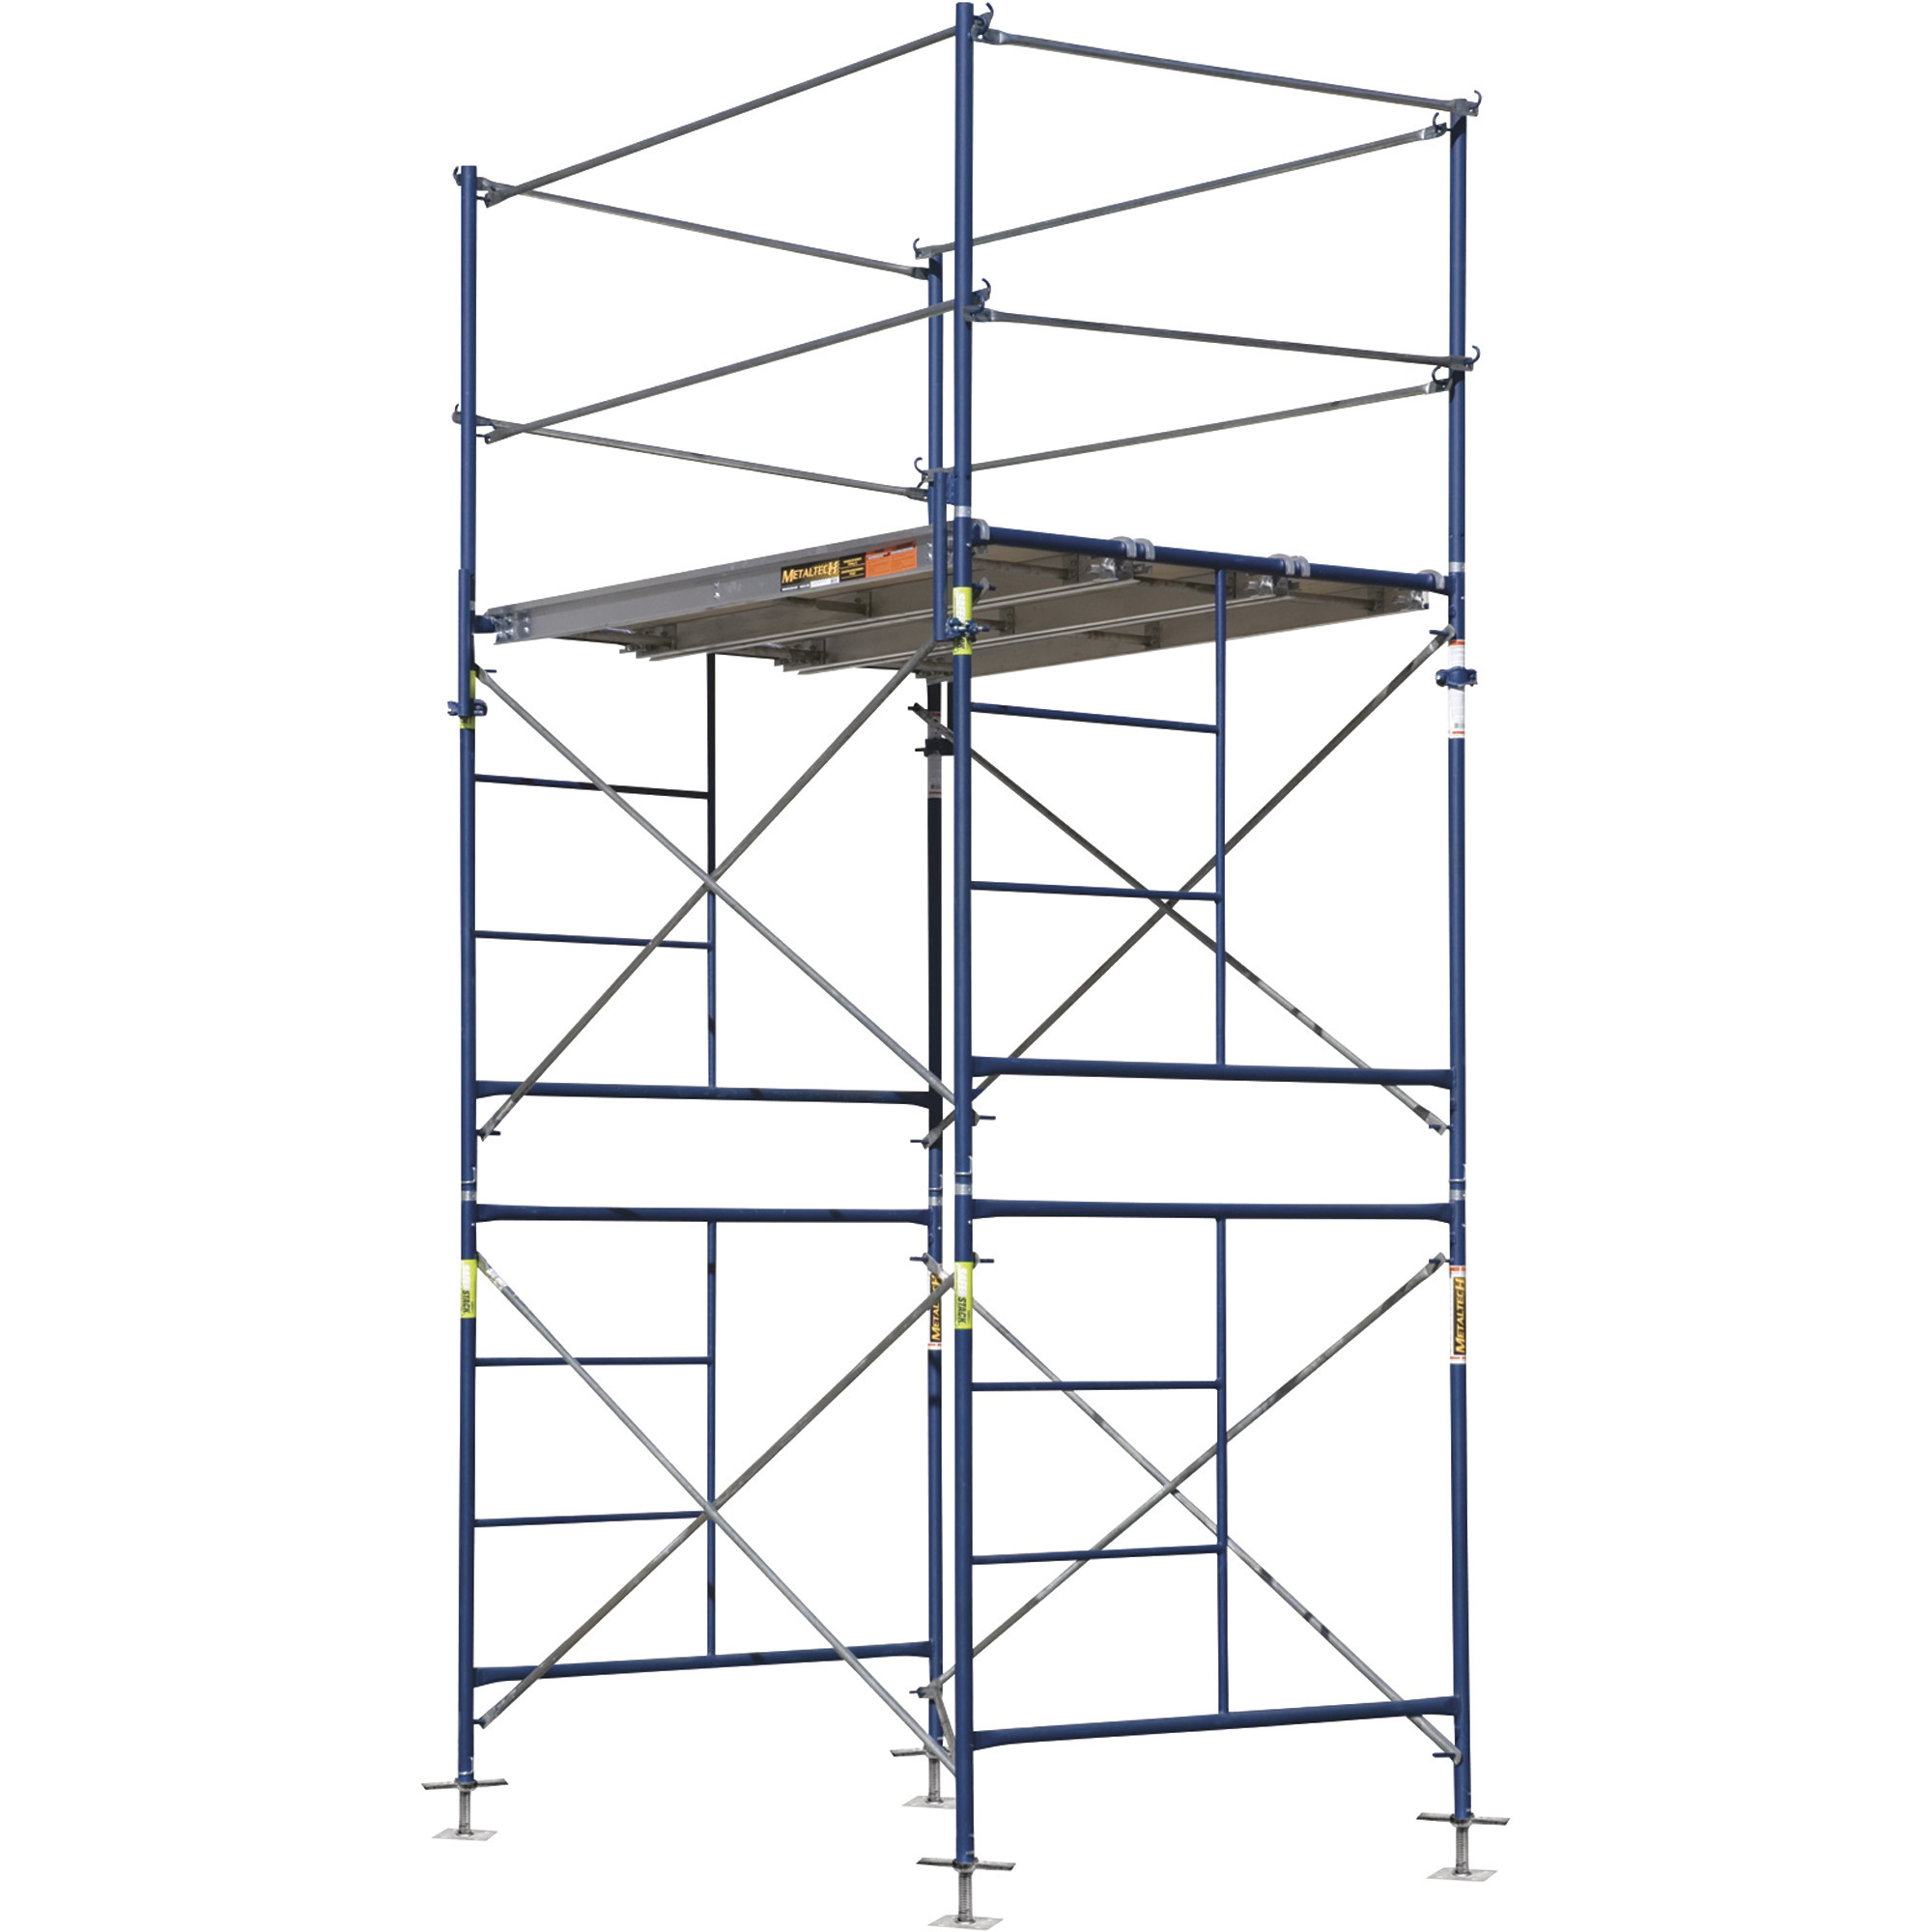 Metaltech Saferstack Complete Fixed Scaffold Tower, 5ft.W x 7ft.D x 10ft.H, 2-Sections, Model M-MFT5710A